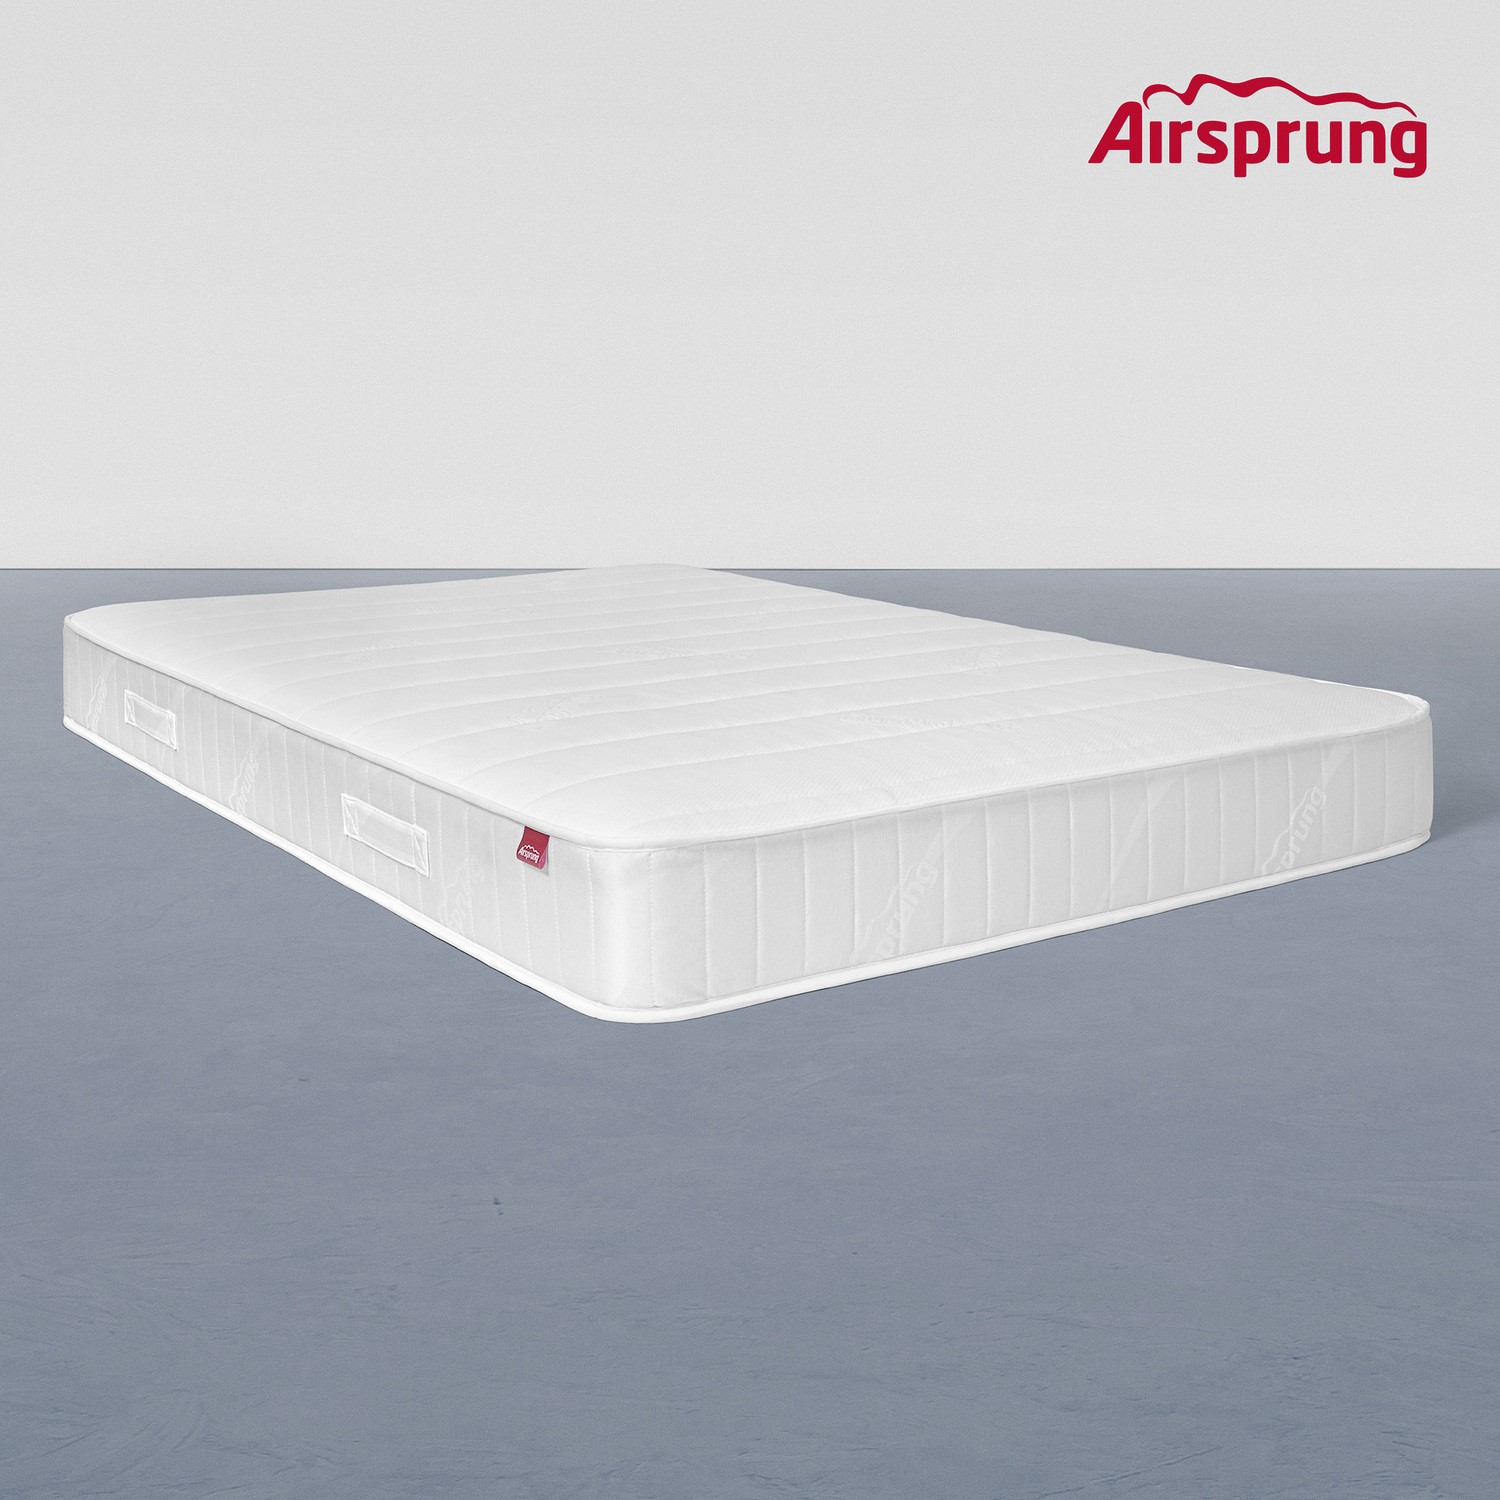 Read more about Double 1000 pocket sprung rolled recycled fibre mattress airsprung